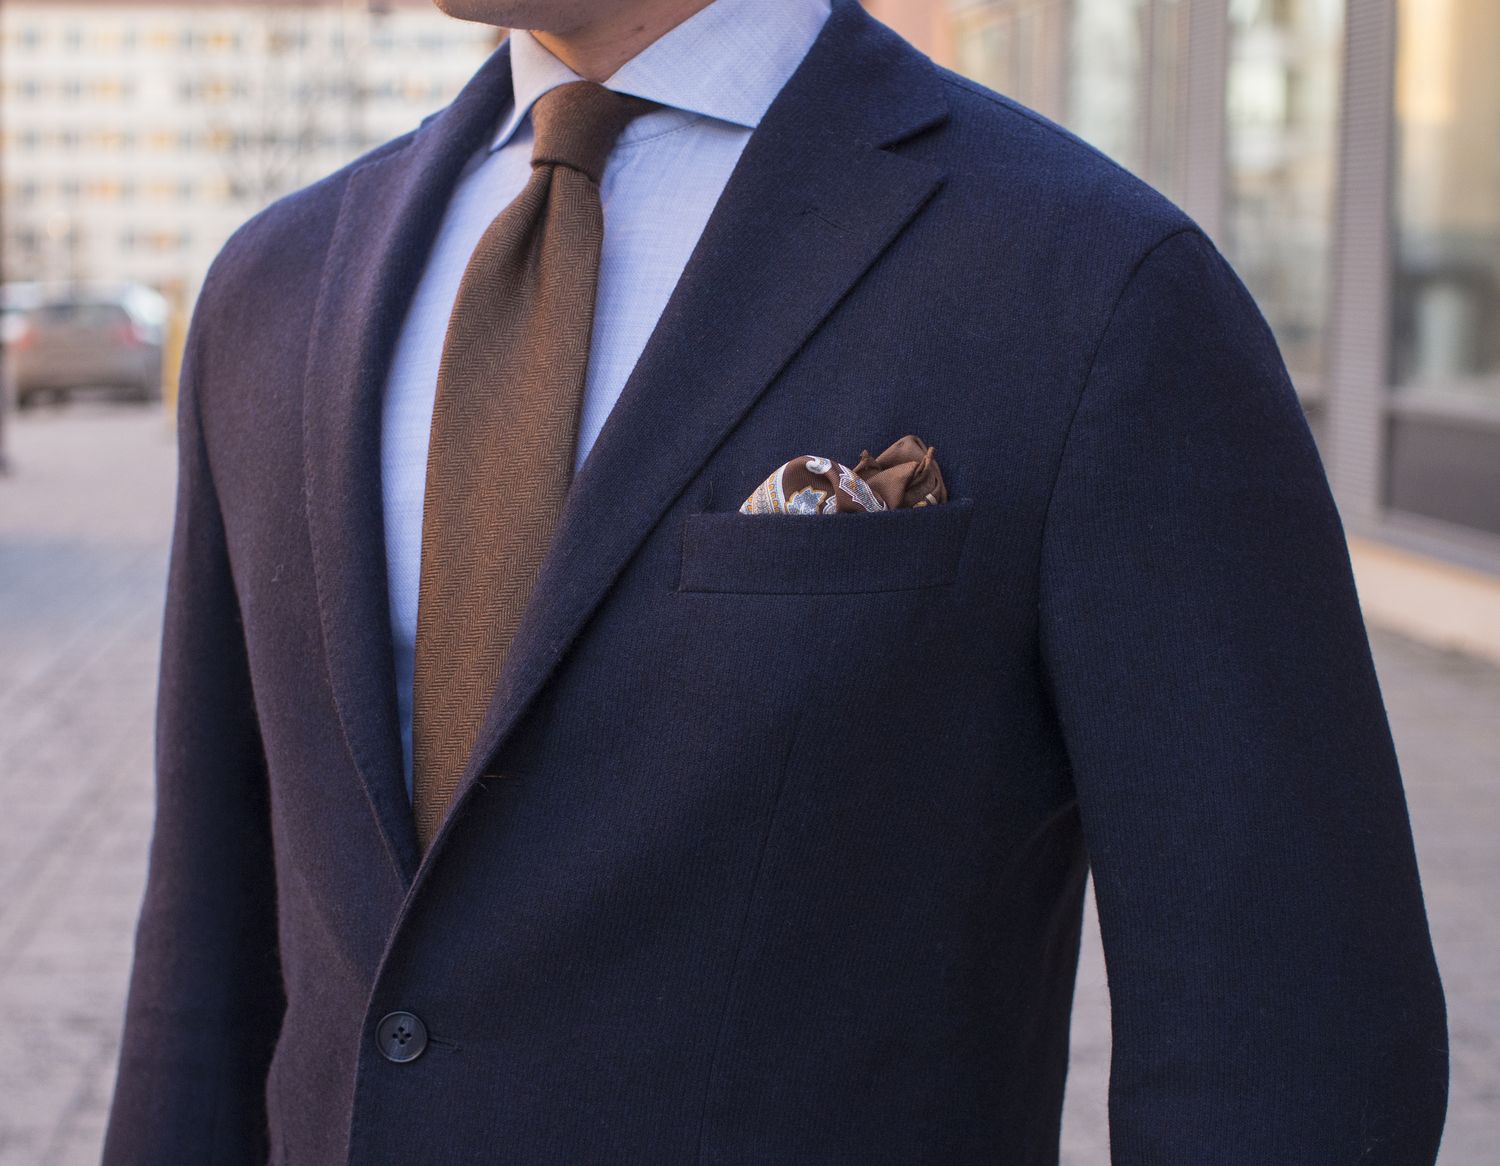 How To Dress Formal Without A Suit